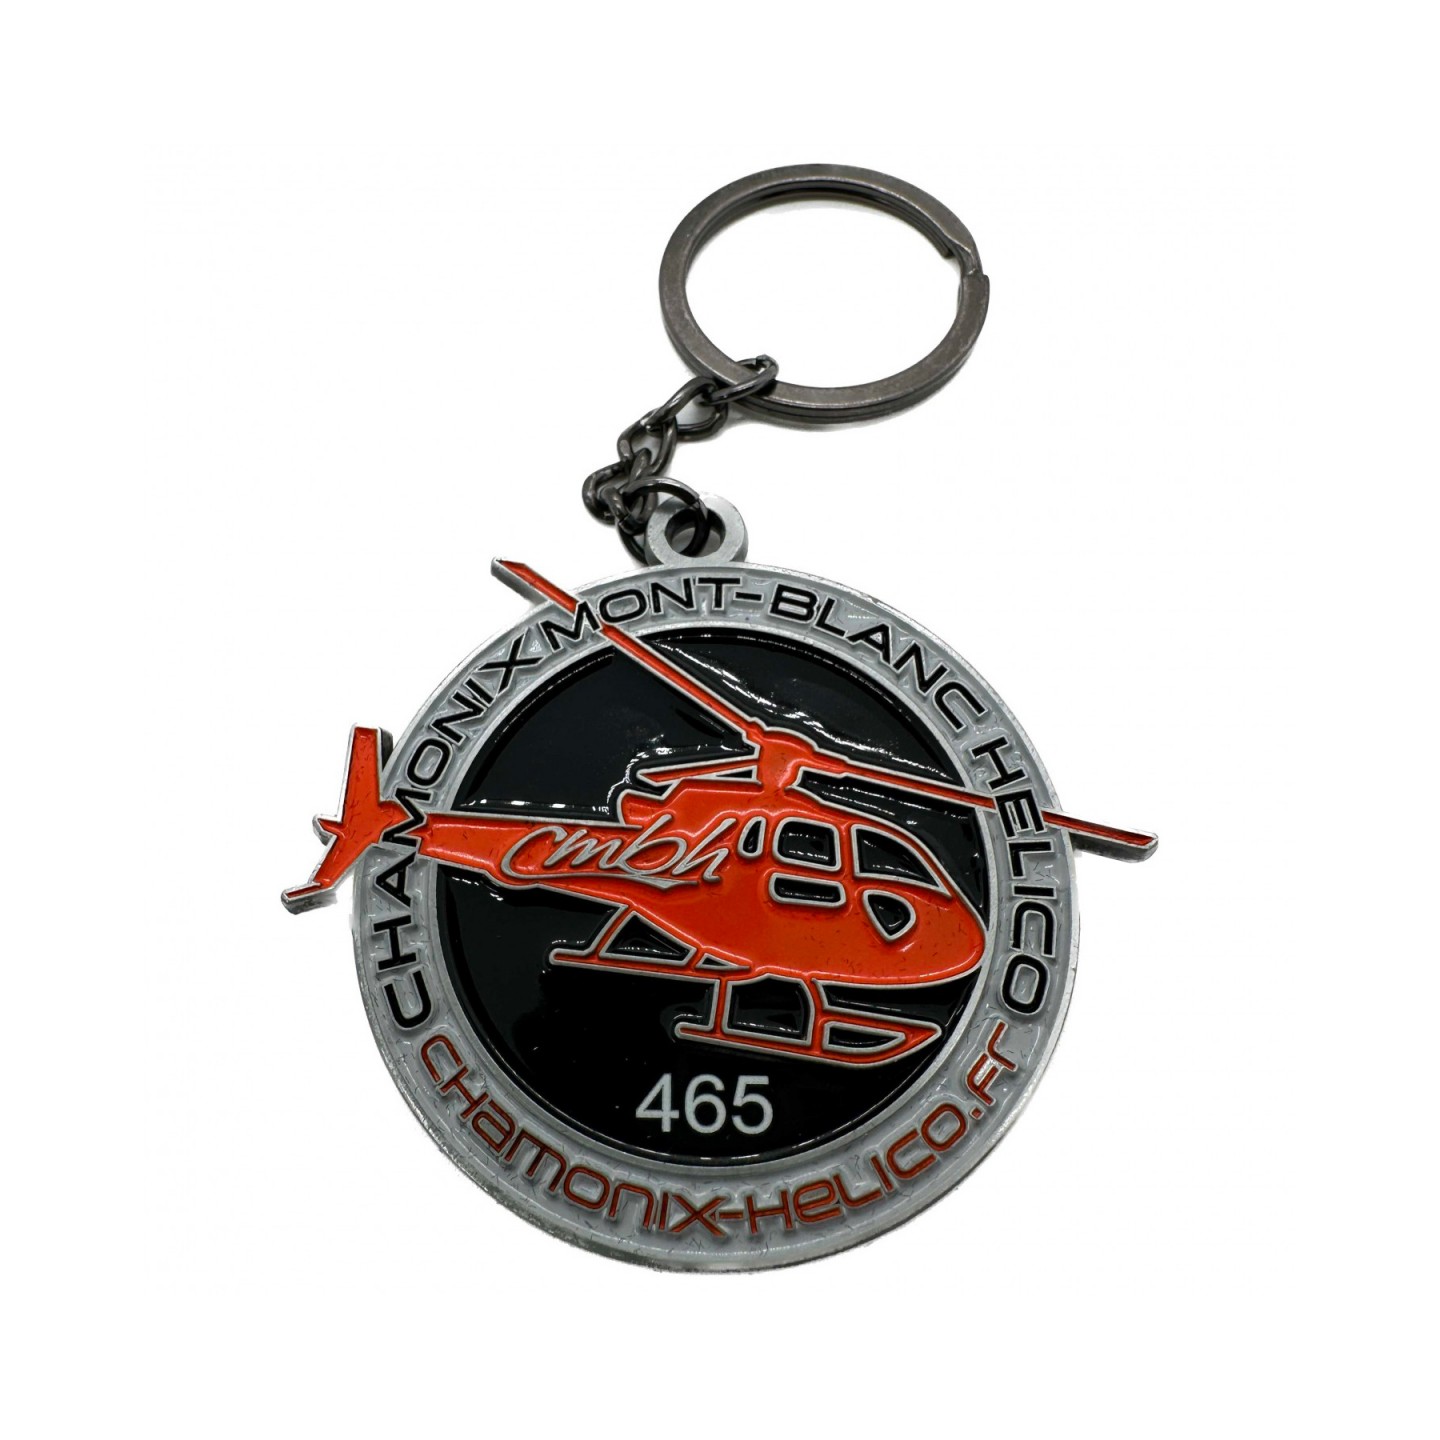 Collector's key ring